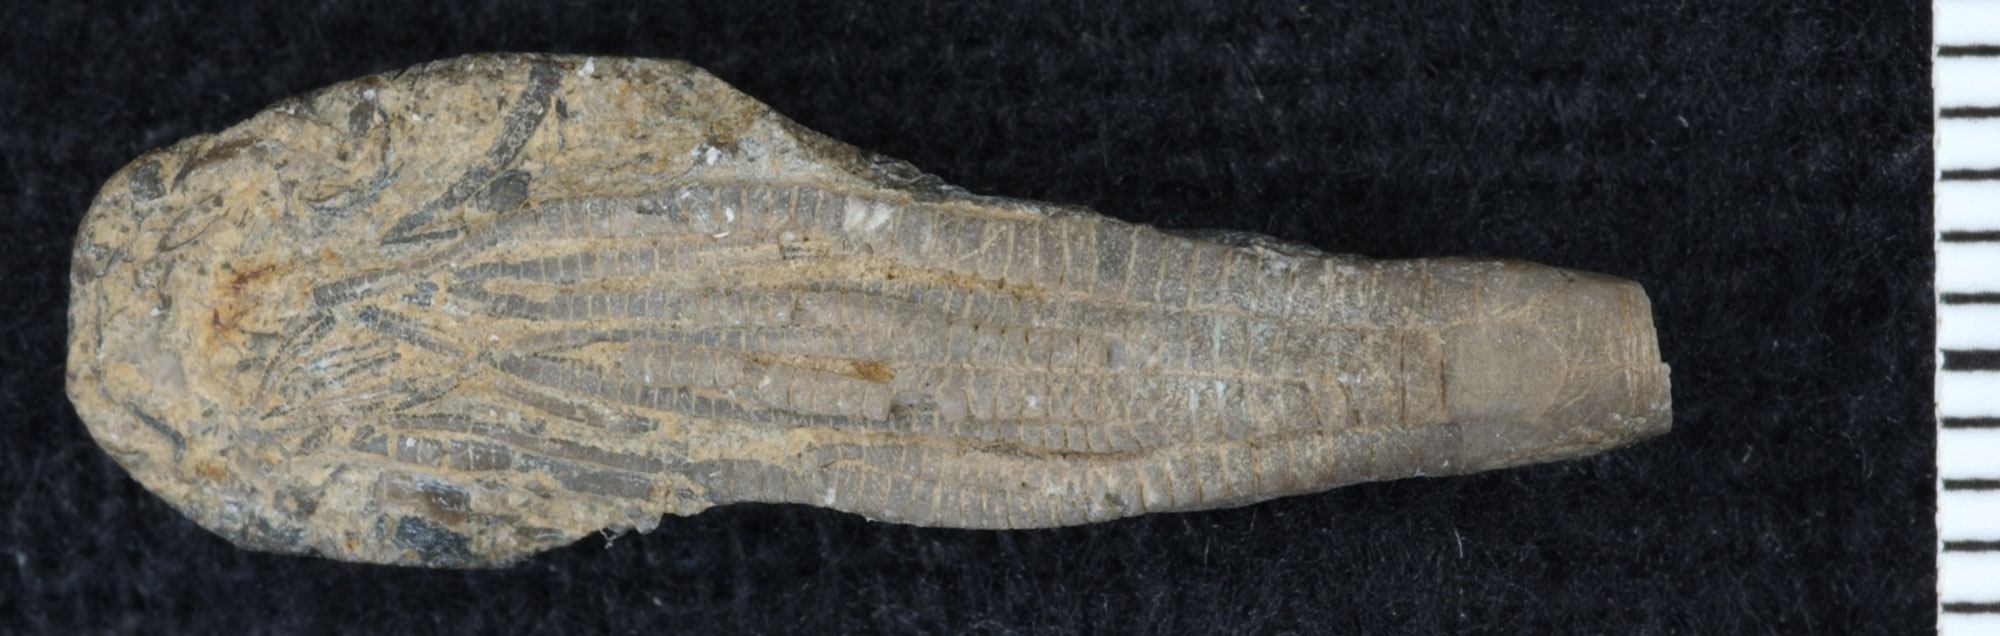 Photograph of a crinoid from the Ordovician of Utah. The specimen appears to preserve only the arms, with the ends of the arms on the left and the bases on the right. The arms are made up of a series of segments or plates. The scale bar is in millimeters (specimen probably around 2 to 3 centimeters long).